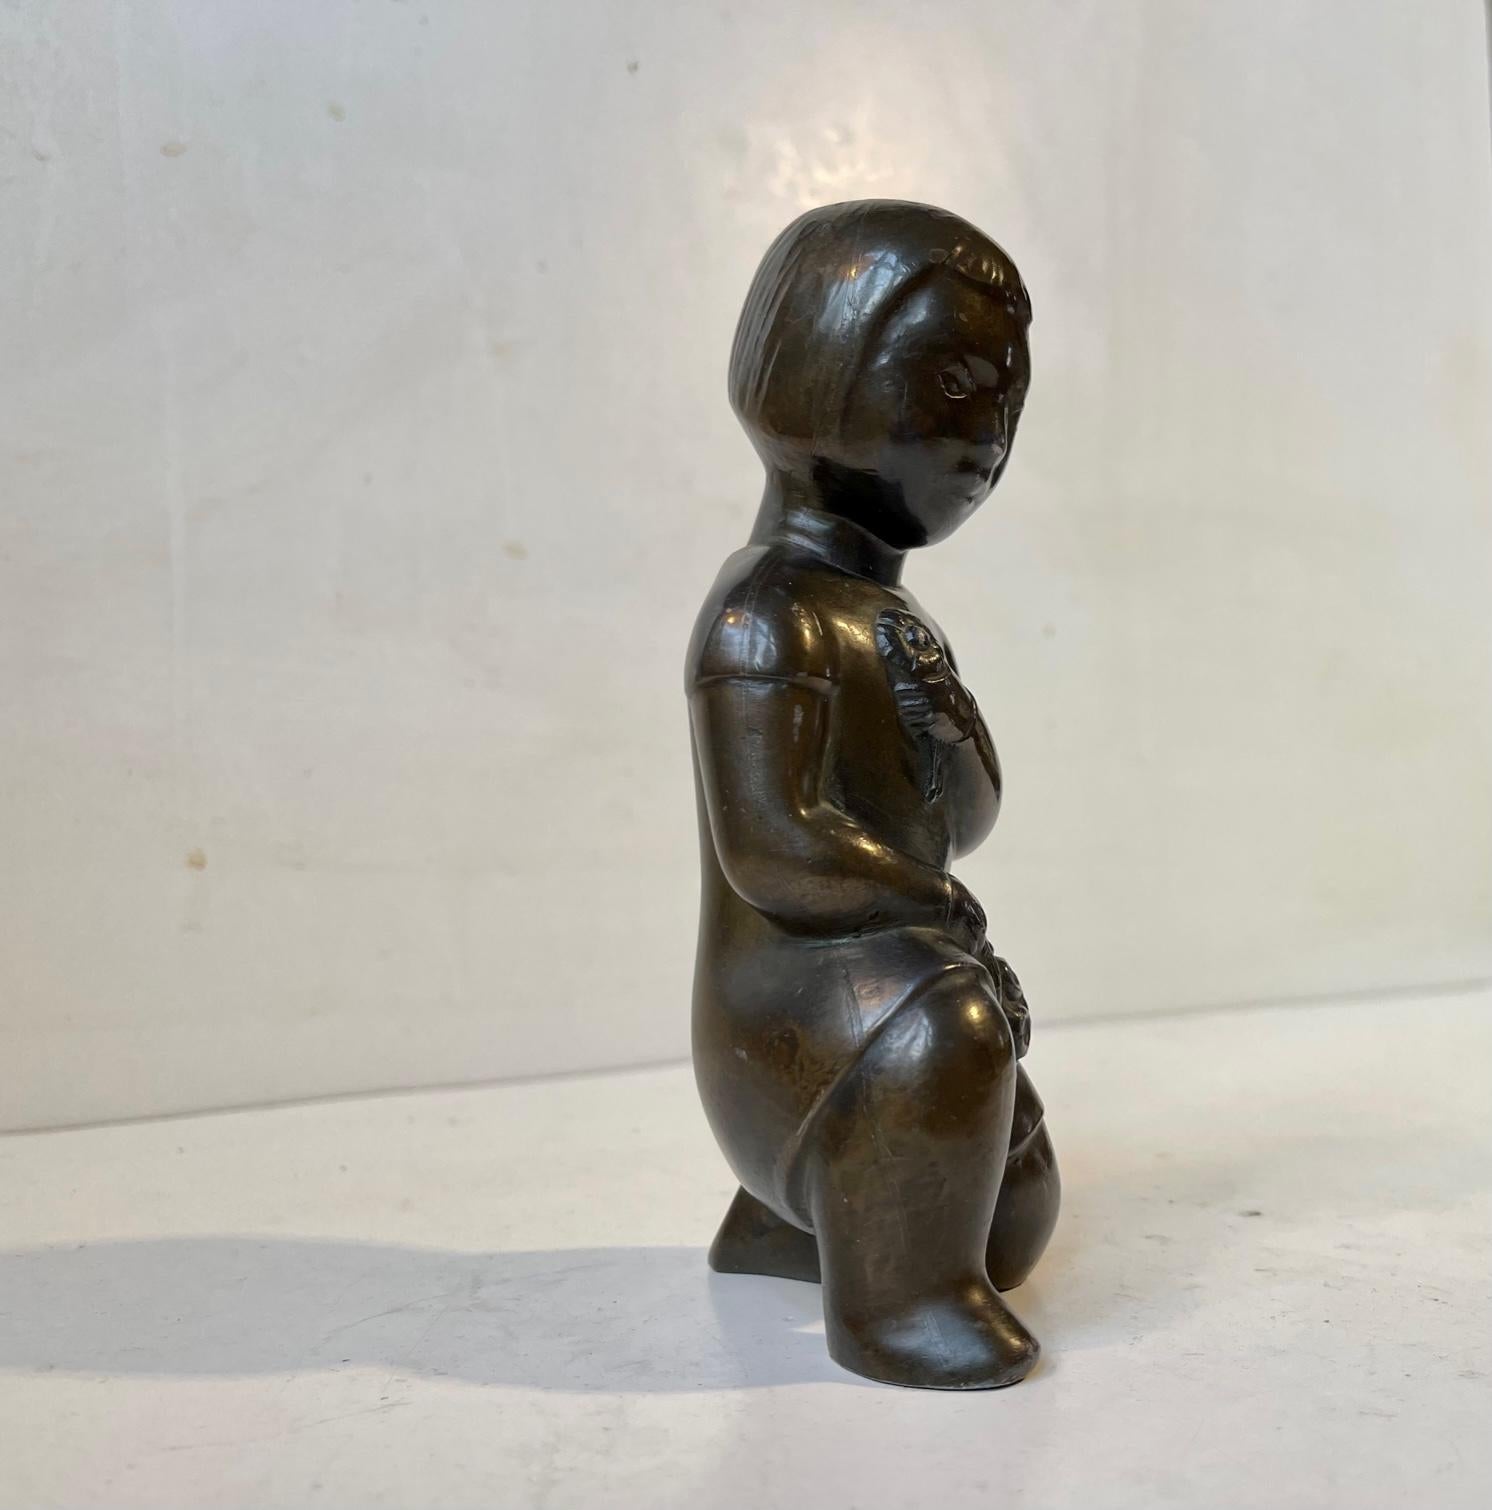 Small stylized bronze sculpture depicting young Inuit girl collecting flowers. Designed and studio cast in Scandinavia in a style reminiscent of Karl Josef Hoffmann and Just Andersen. It has no signature or markings. Measurements: H: 15, D: 6, W: 6